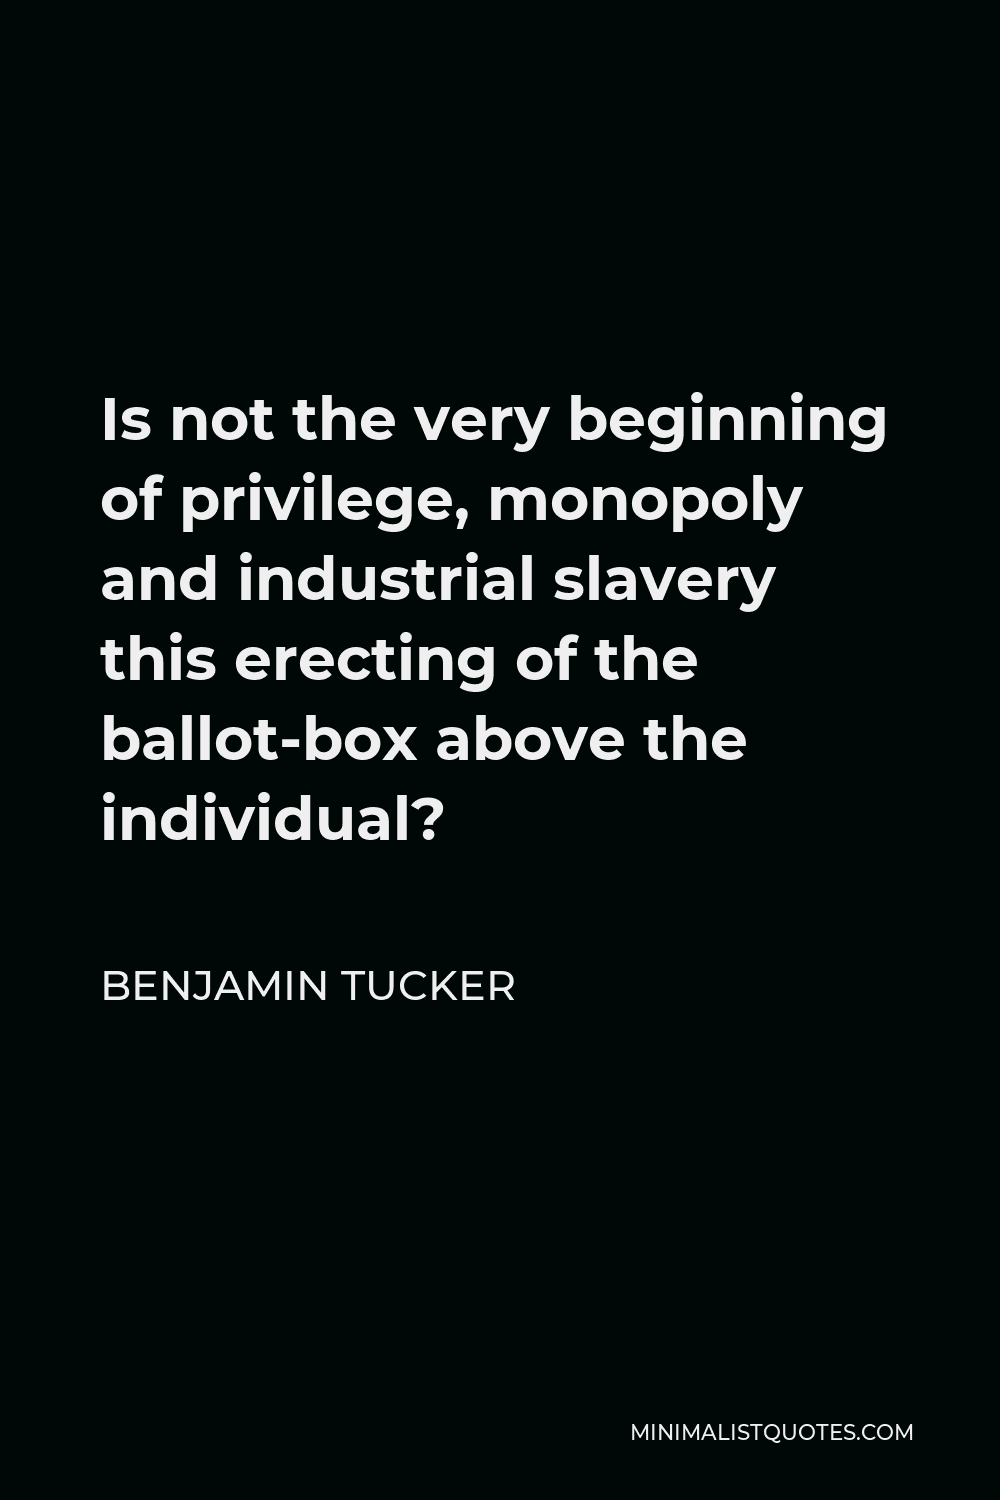 Benjamin Tucker Quote - Is not the very beginning of privilege, monopoly and industrial slavery this erecting of the ballot-box above the individual?